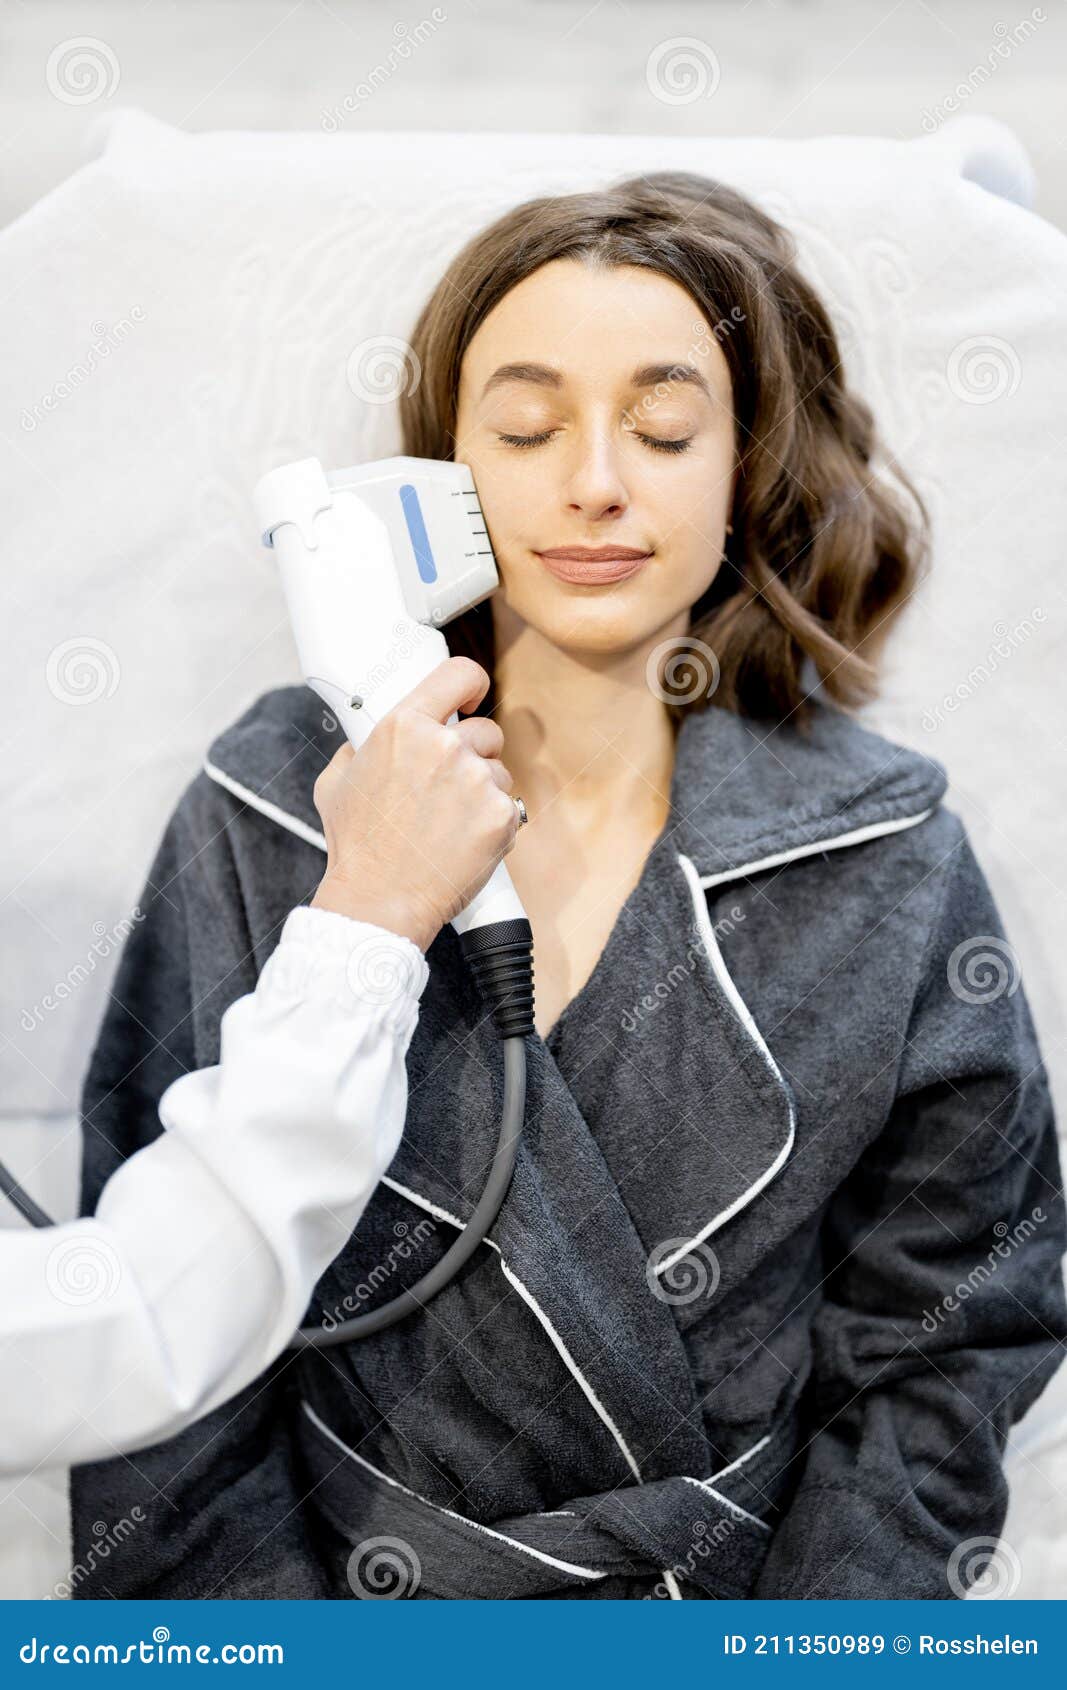 Woman On Ultrasound Face Lifting Procedure In Cosmetology Salon Stock